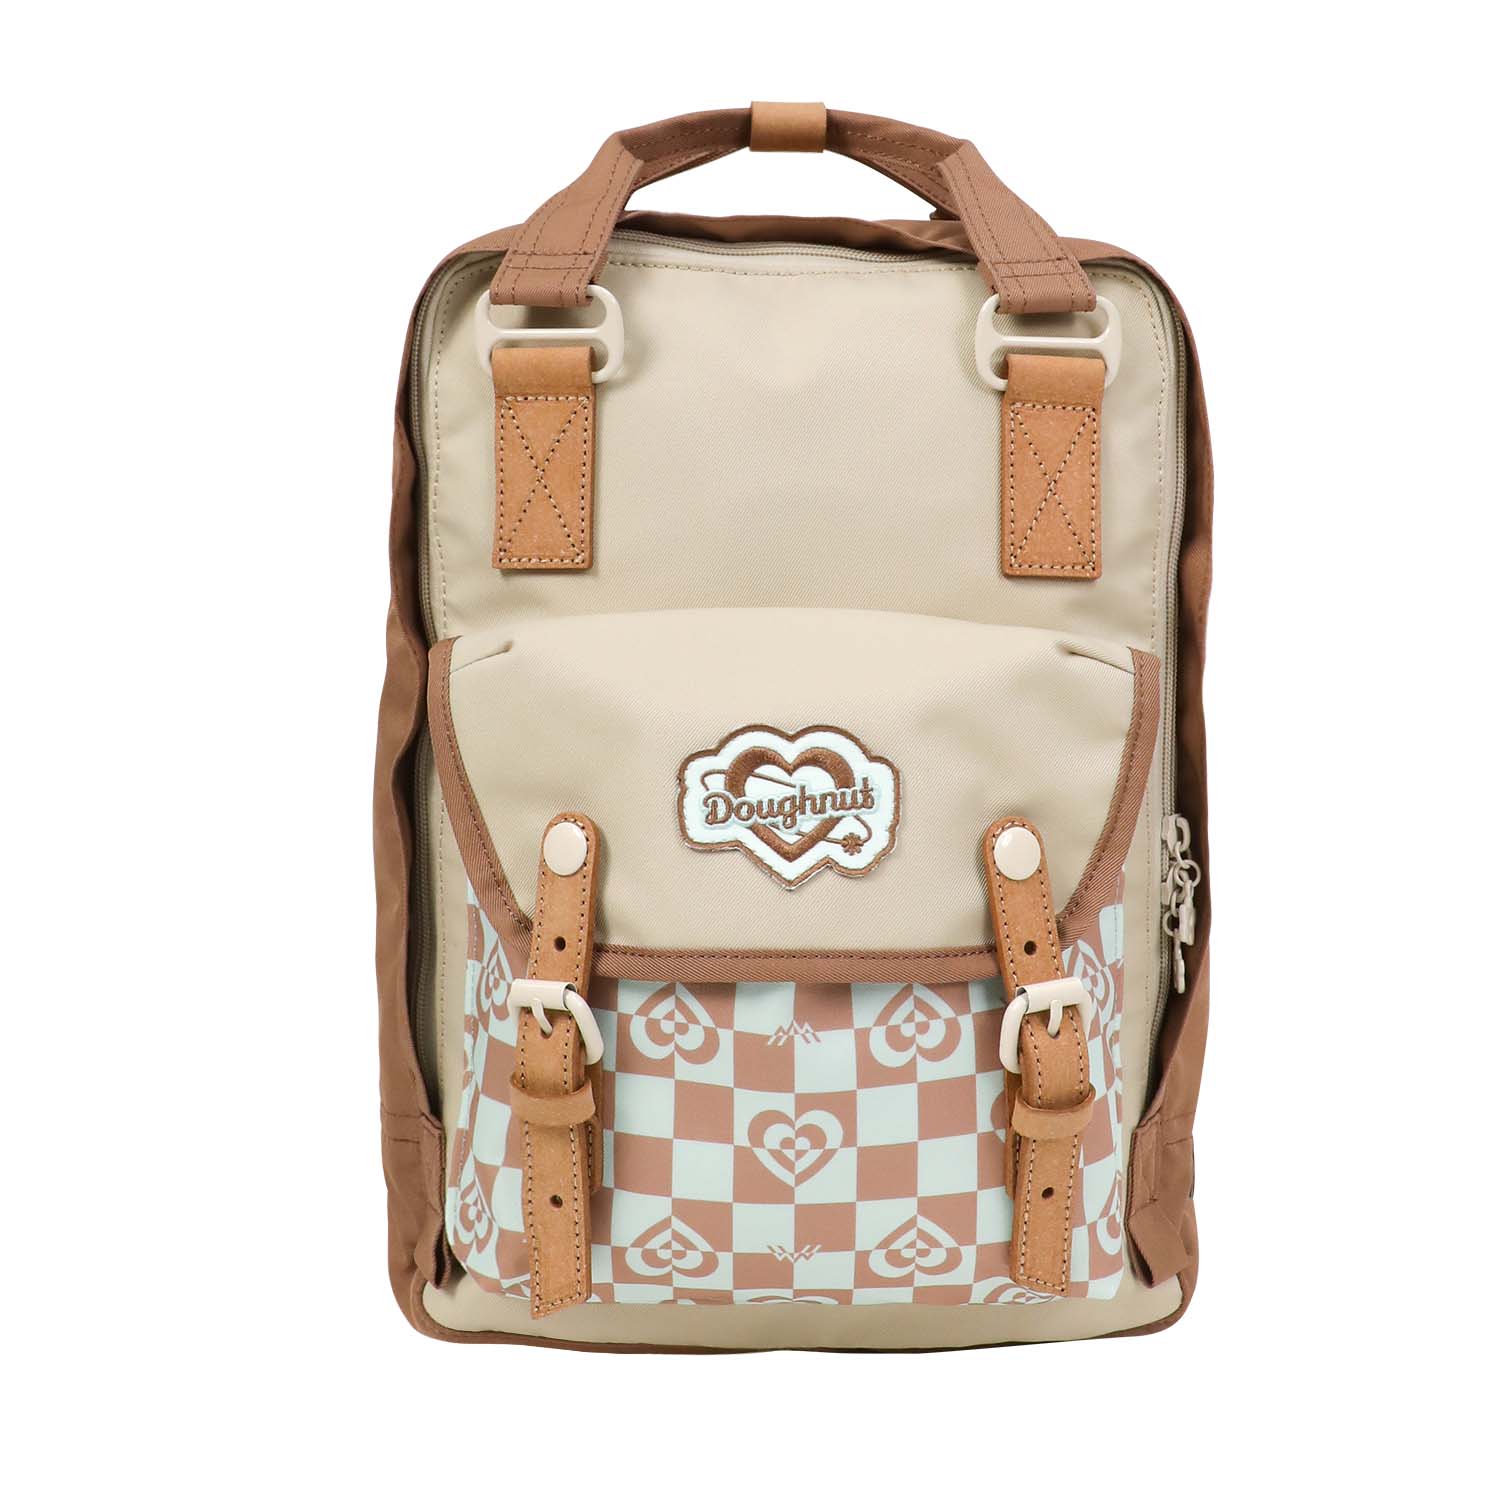 Macaroon Kaleido Series in Mushroom features a medium-sized backpack in brown, cream and soft blue hues